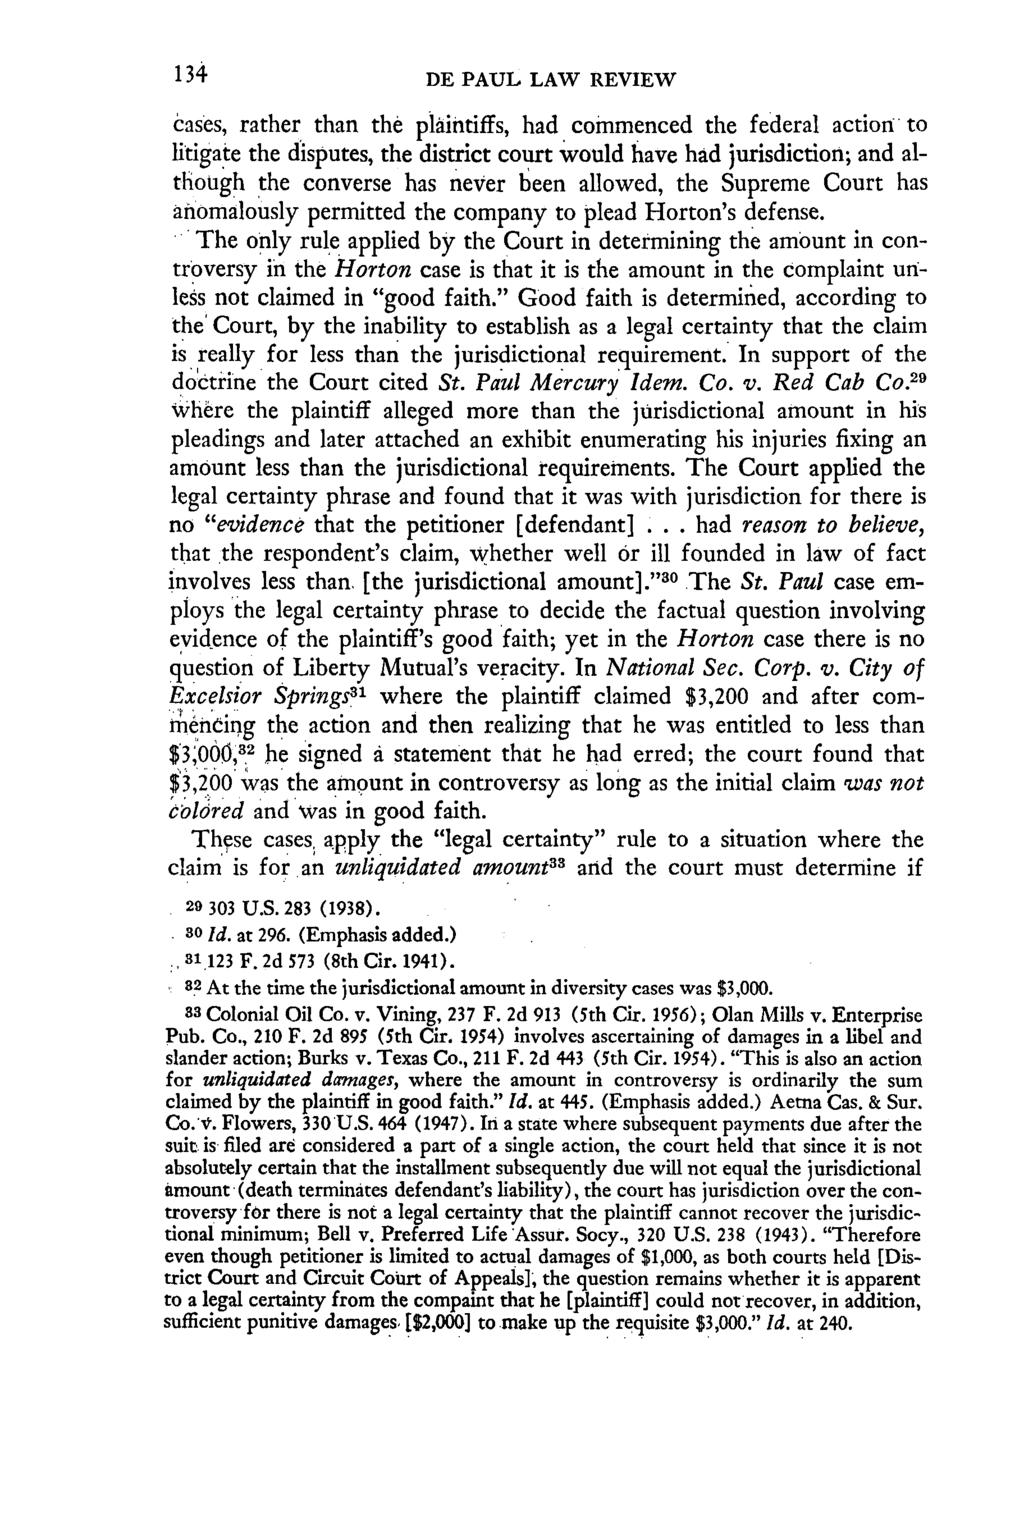 DE PAUL LAW REVIEW cases, rather than the plaintiffs, had commenced the federal action to litigate the disputes, the district court would have had jurisdiction; and although the converse has never